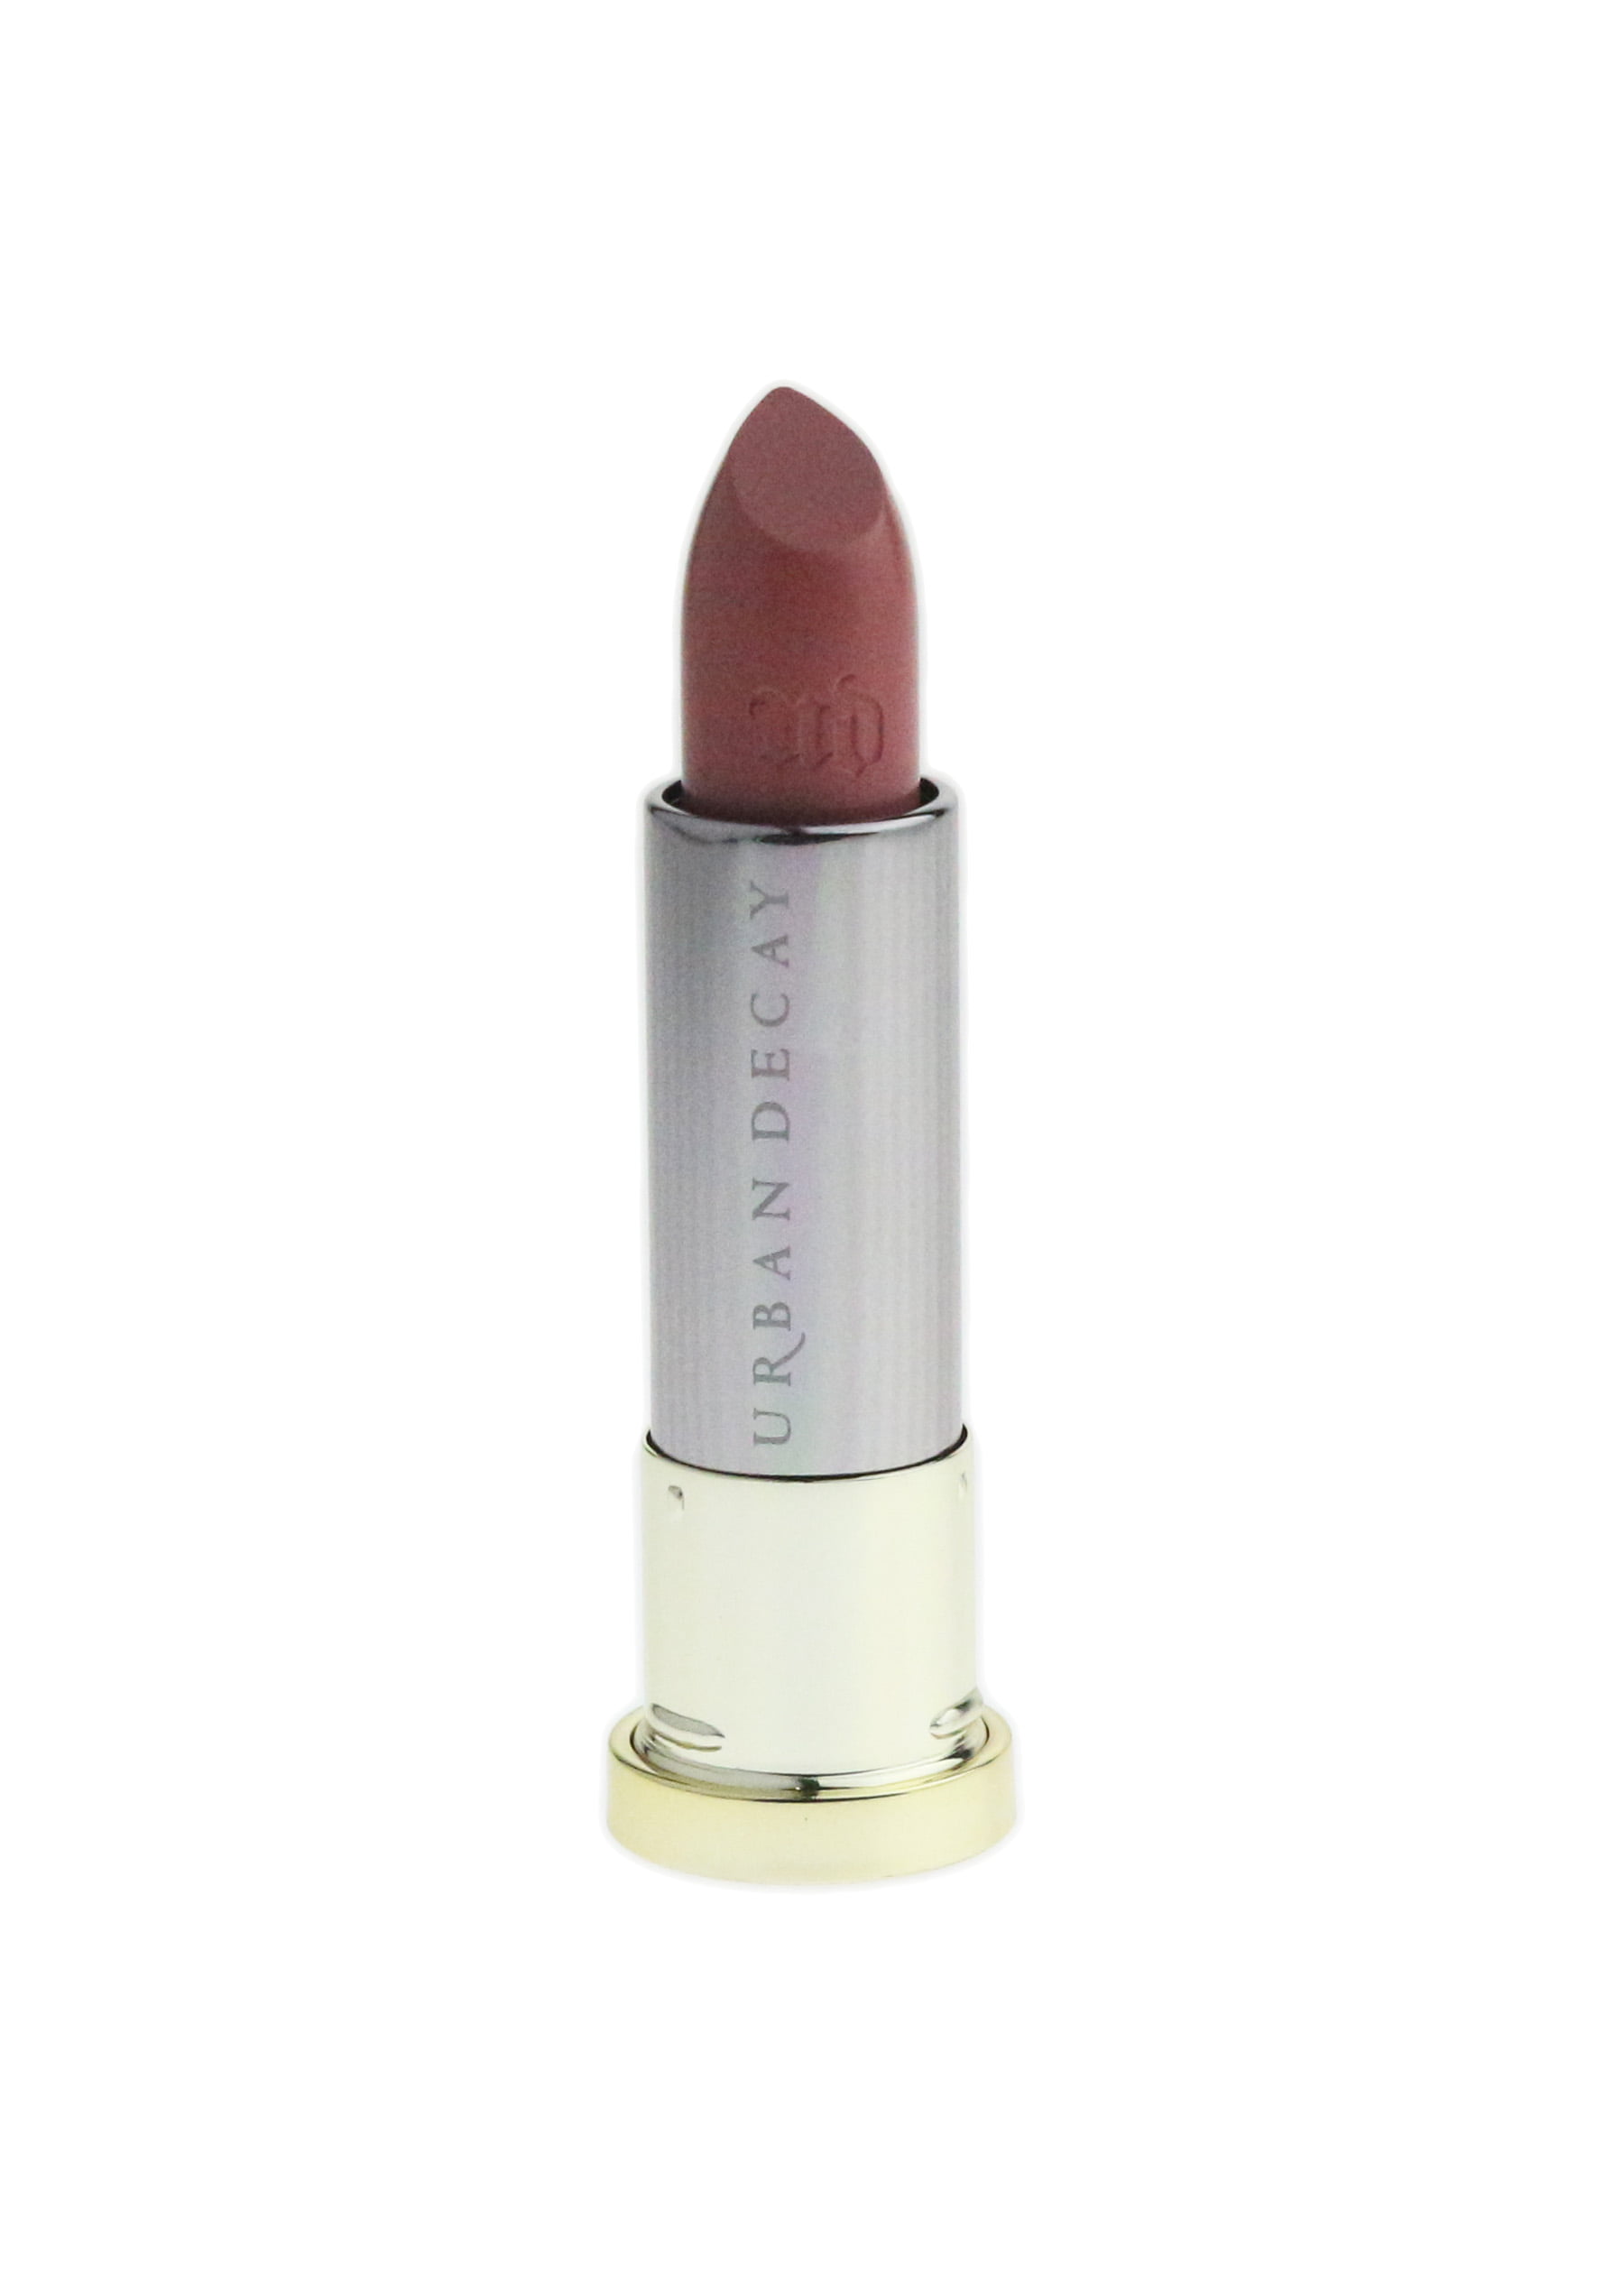 Urban Decay Urban Decay Vice Lipstick Sheer 0 11oz 3 4g New In Images, Photos, Reviews